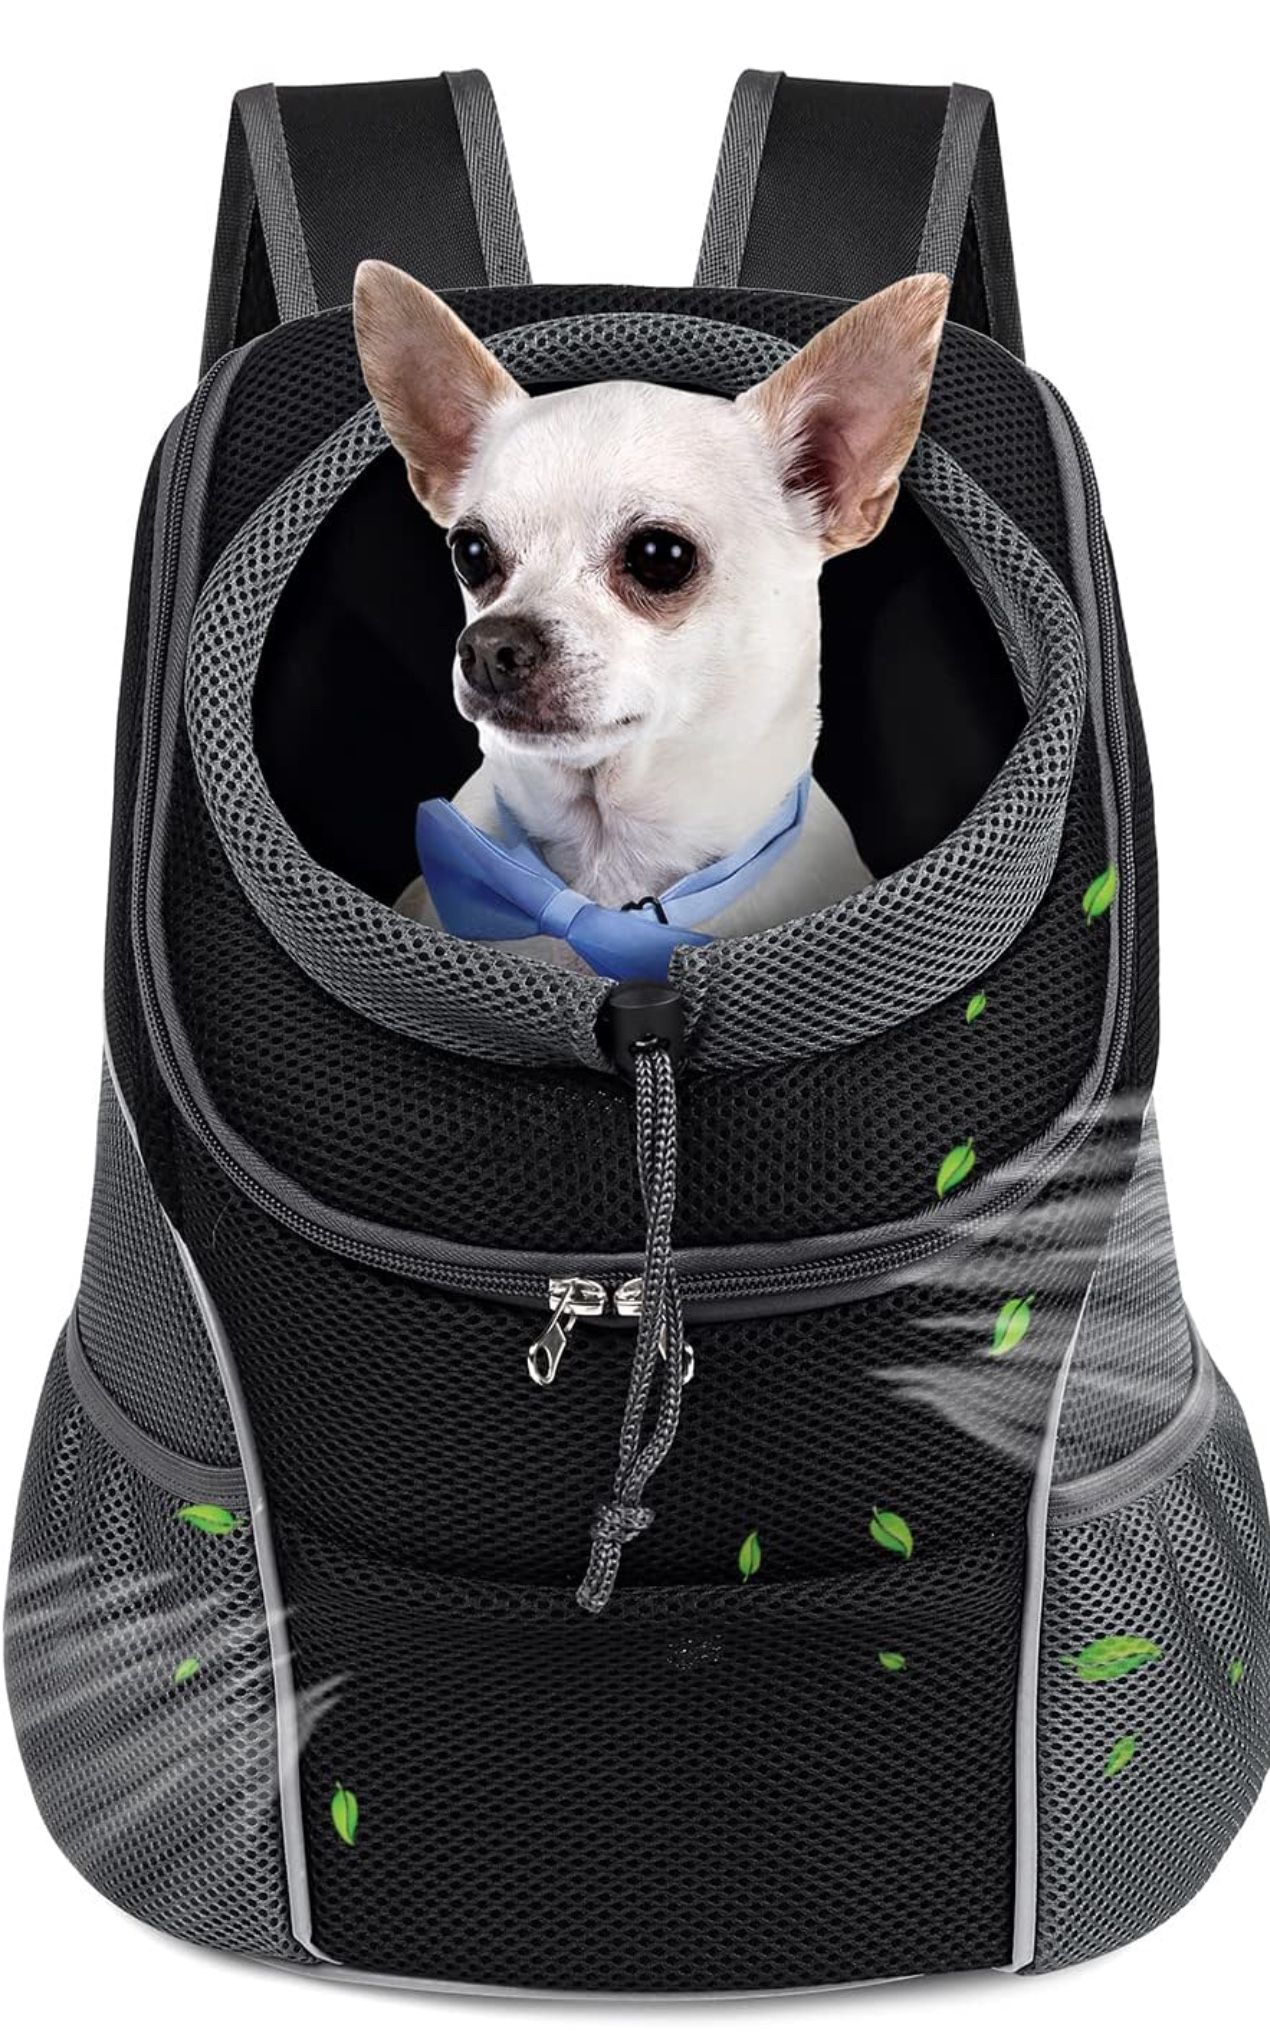 Pet Front, Head-Out Backpack Carrier Size (Small) with Side Storage Pockets (Black) 